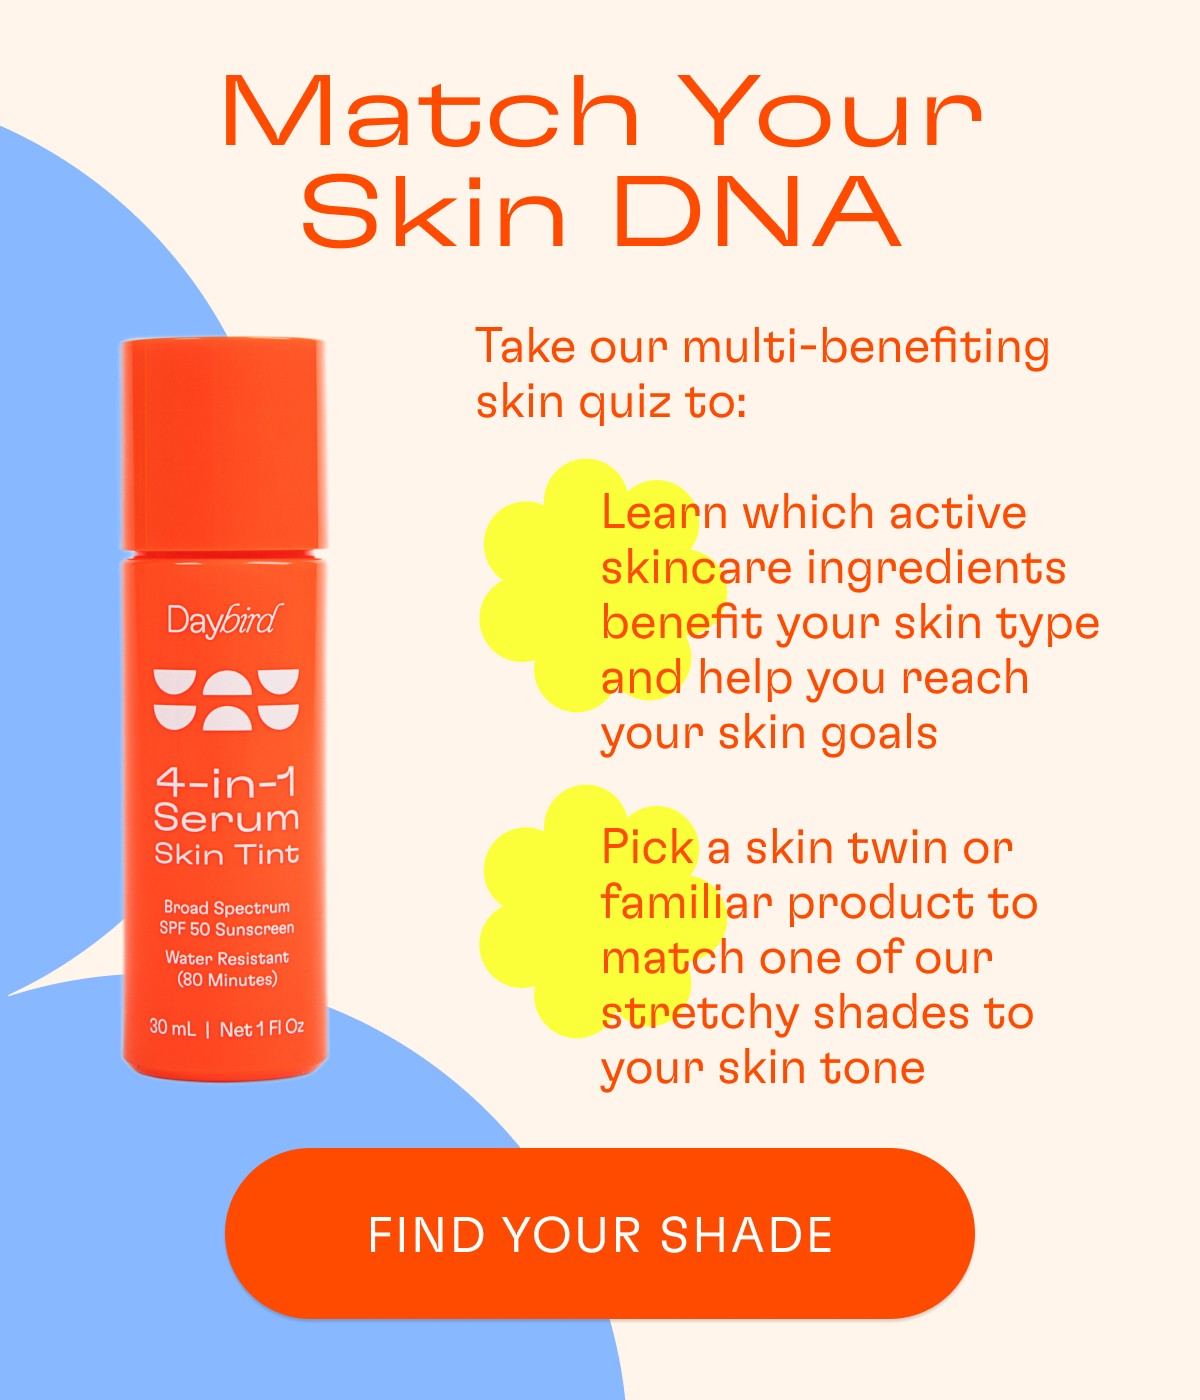 Match Your Skin DNA: Find Your Shade